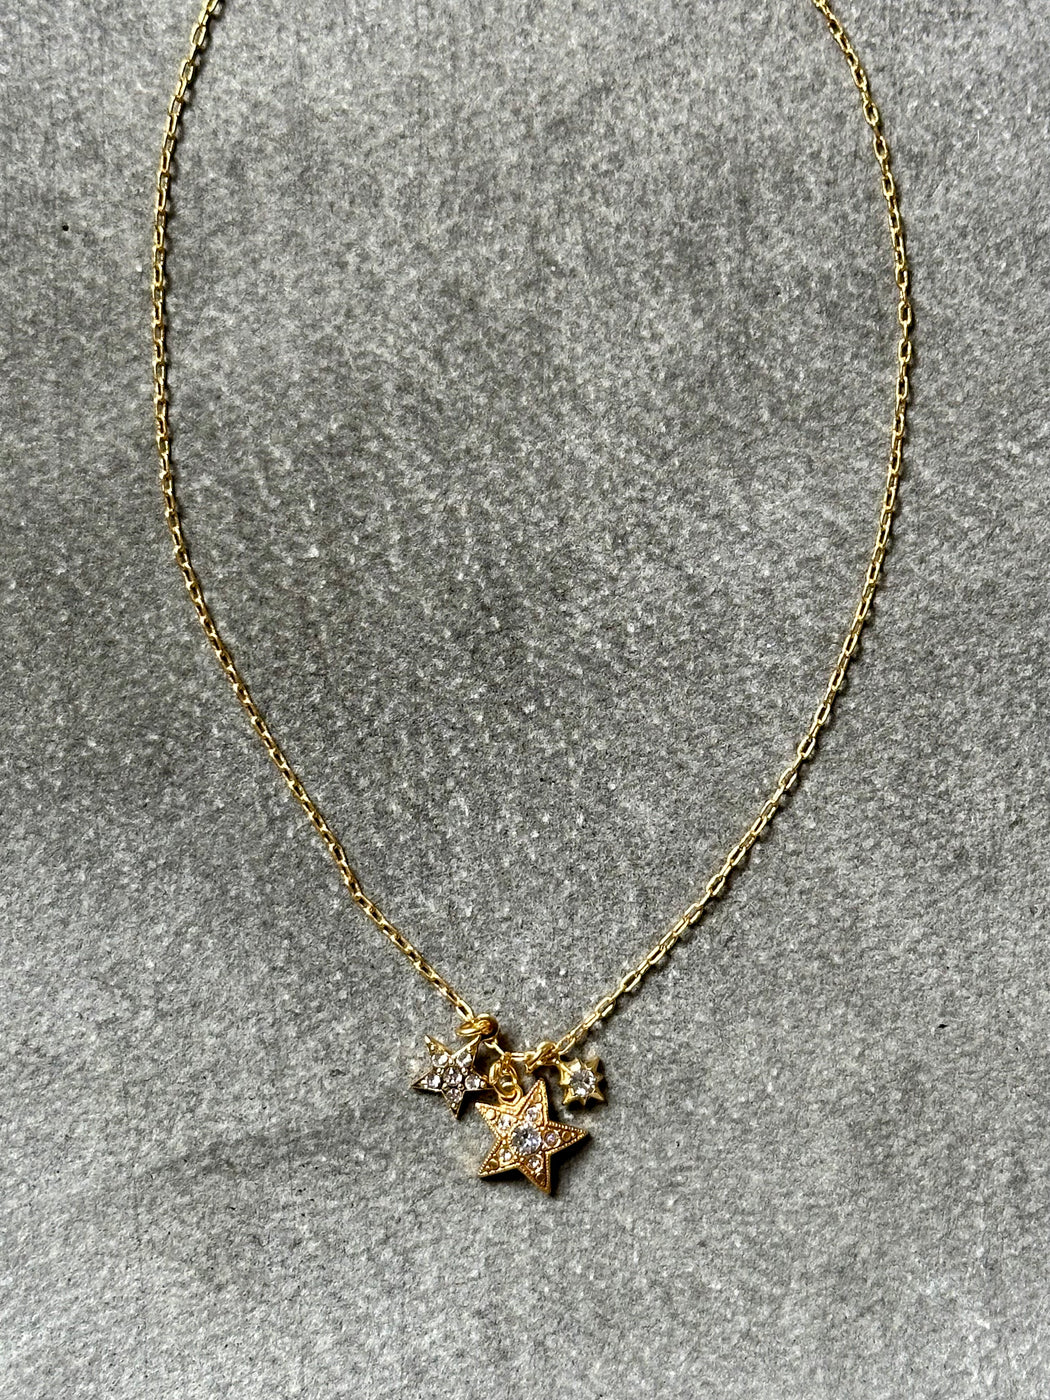 "Wish Upon a Star" Necklace by Catherine Popesco